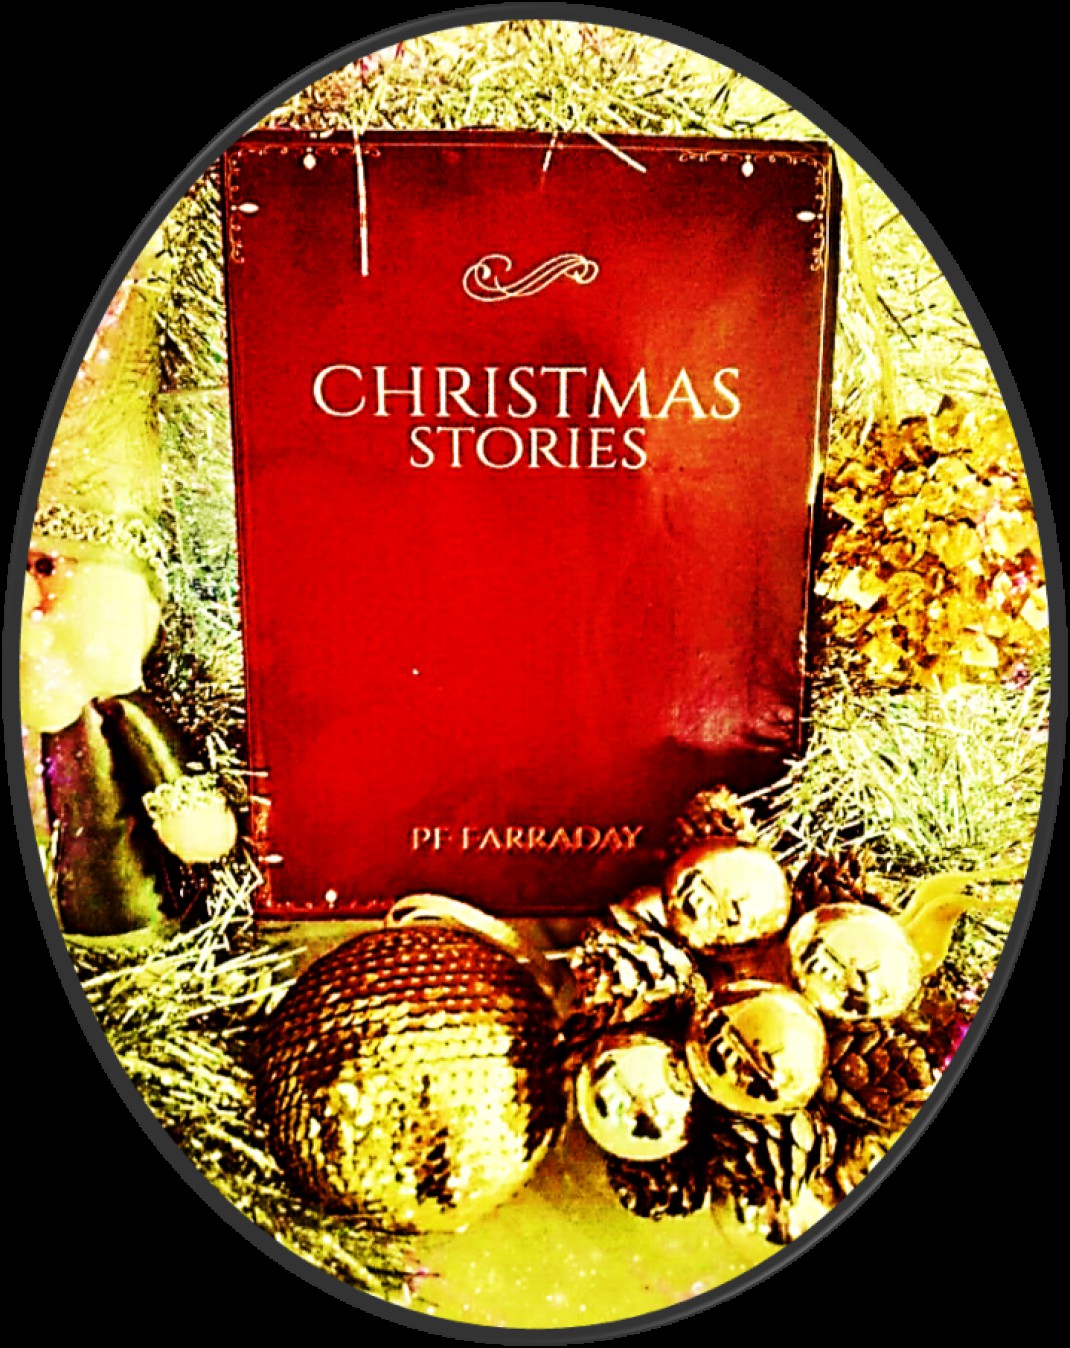 PF Farraday’s extraordinary book ‘Christmas Stories’ gets exceptional reviews on different platforms